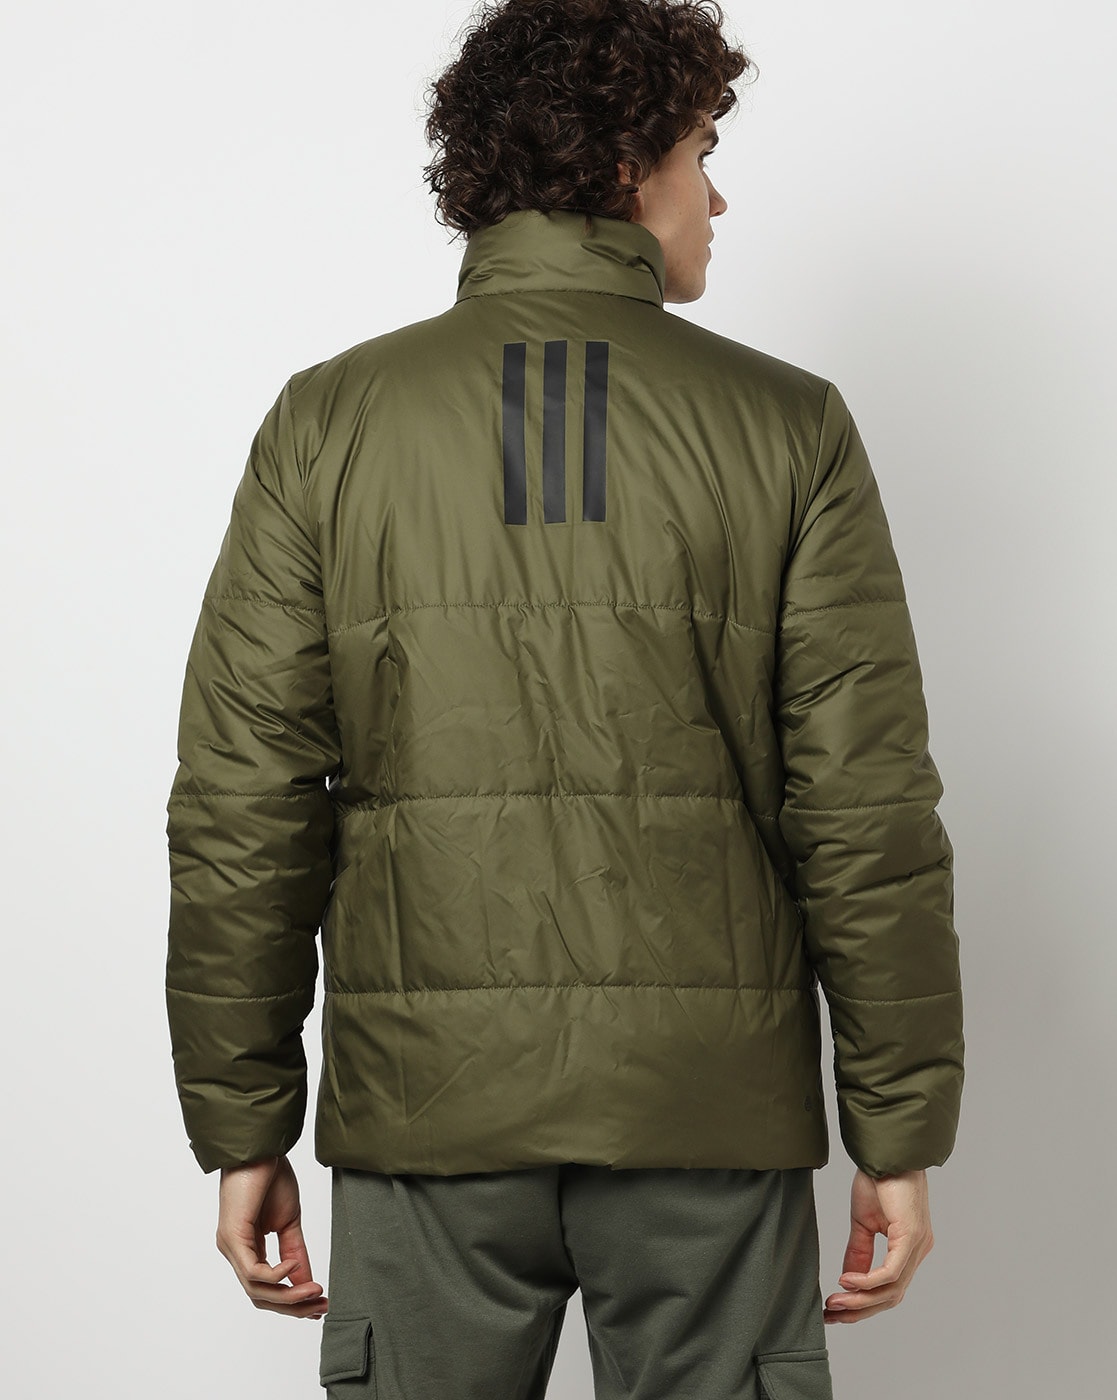 adidas Puffer & Quilted Jackets - Men - 49 products | FASHIOLA.com